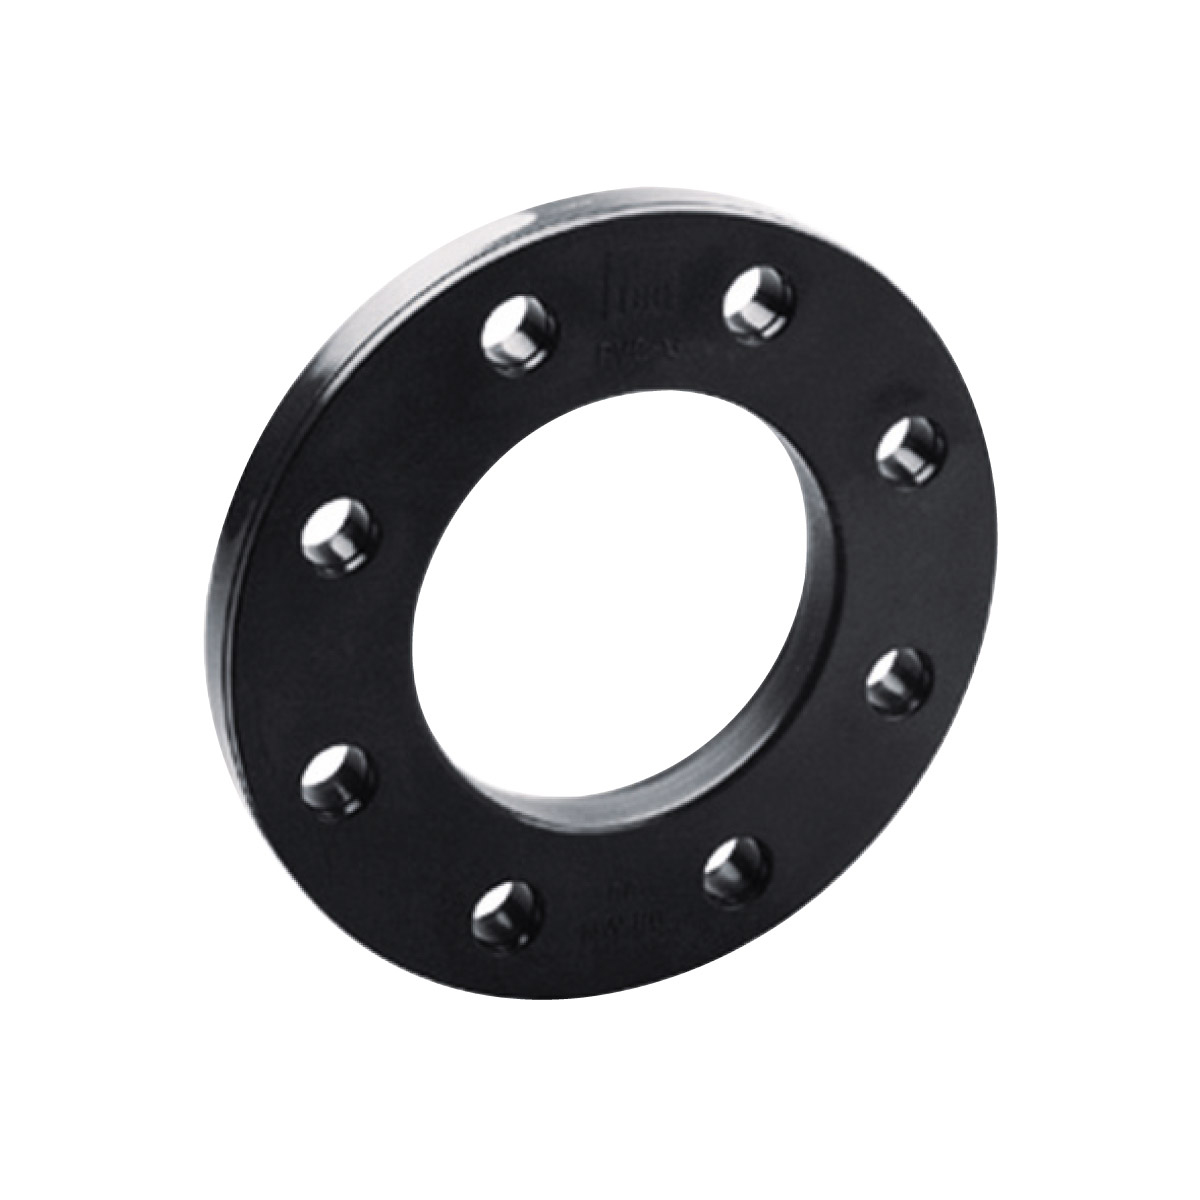 IBG® flange adapter connection dimensions DIN/ISO, GFK, black d32 IBG® flange adapter connection dimensions DIN/ISO, GFK, black d32